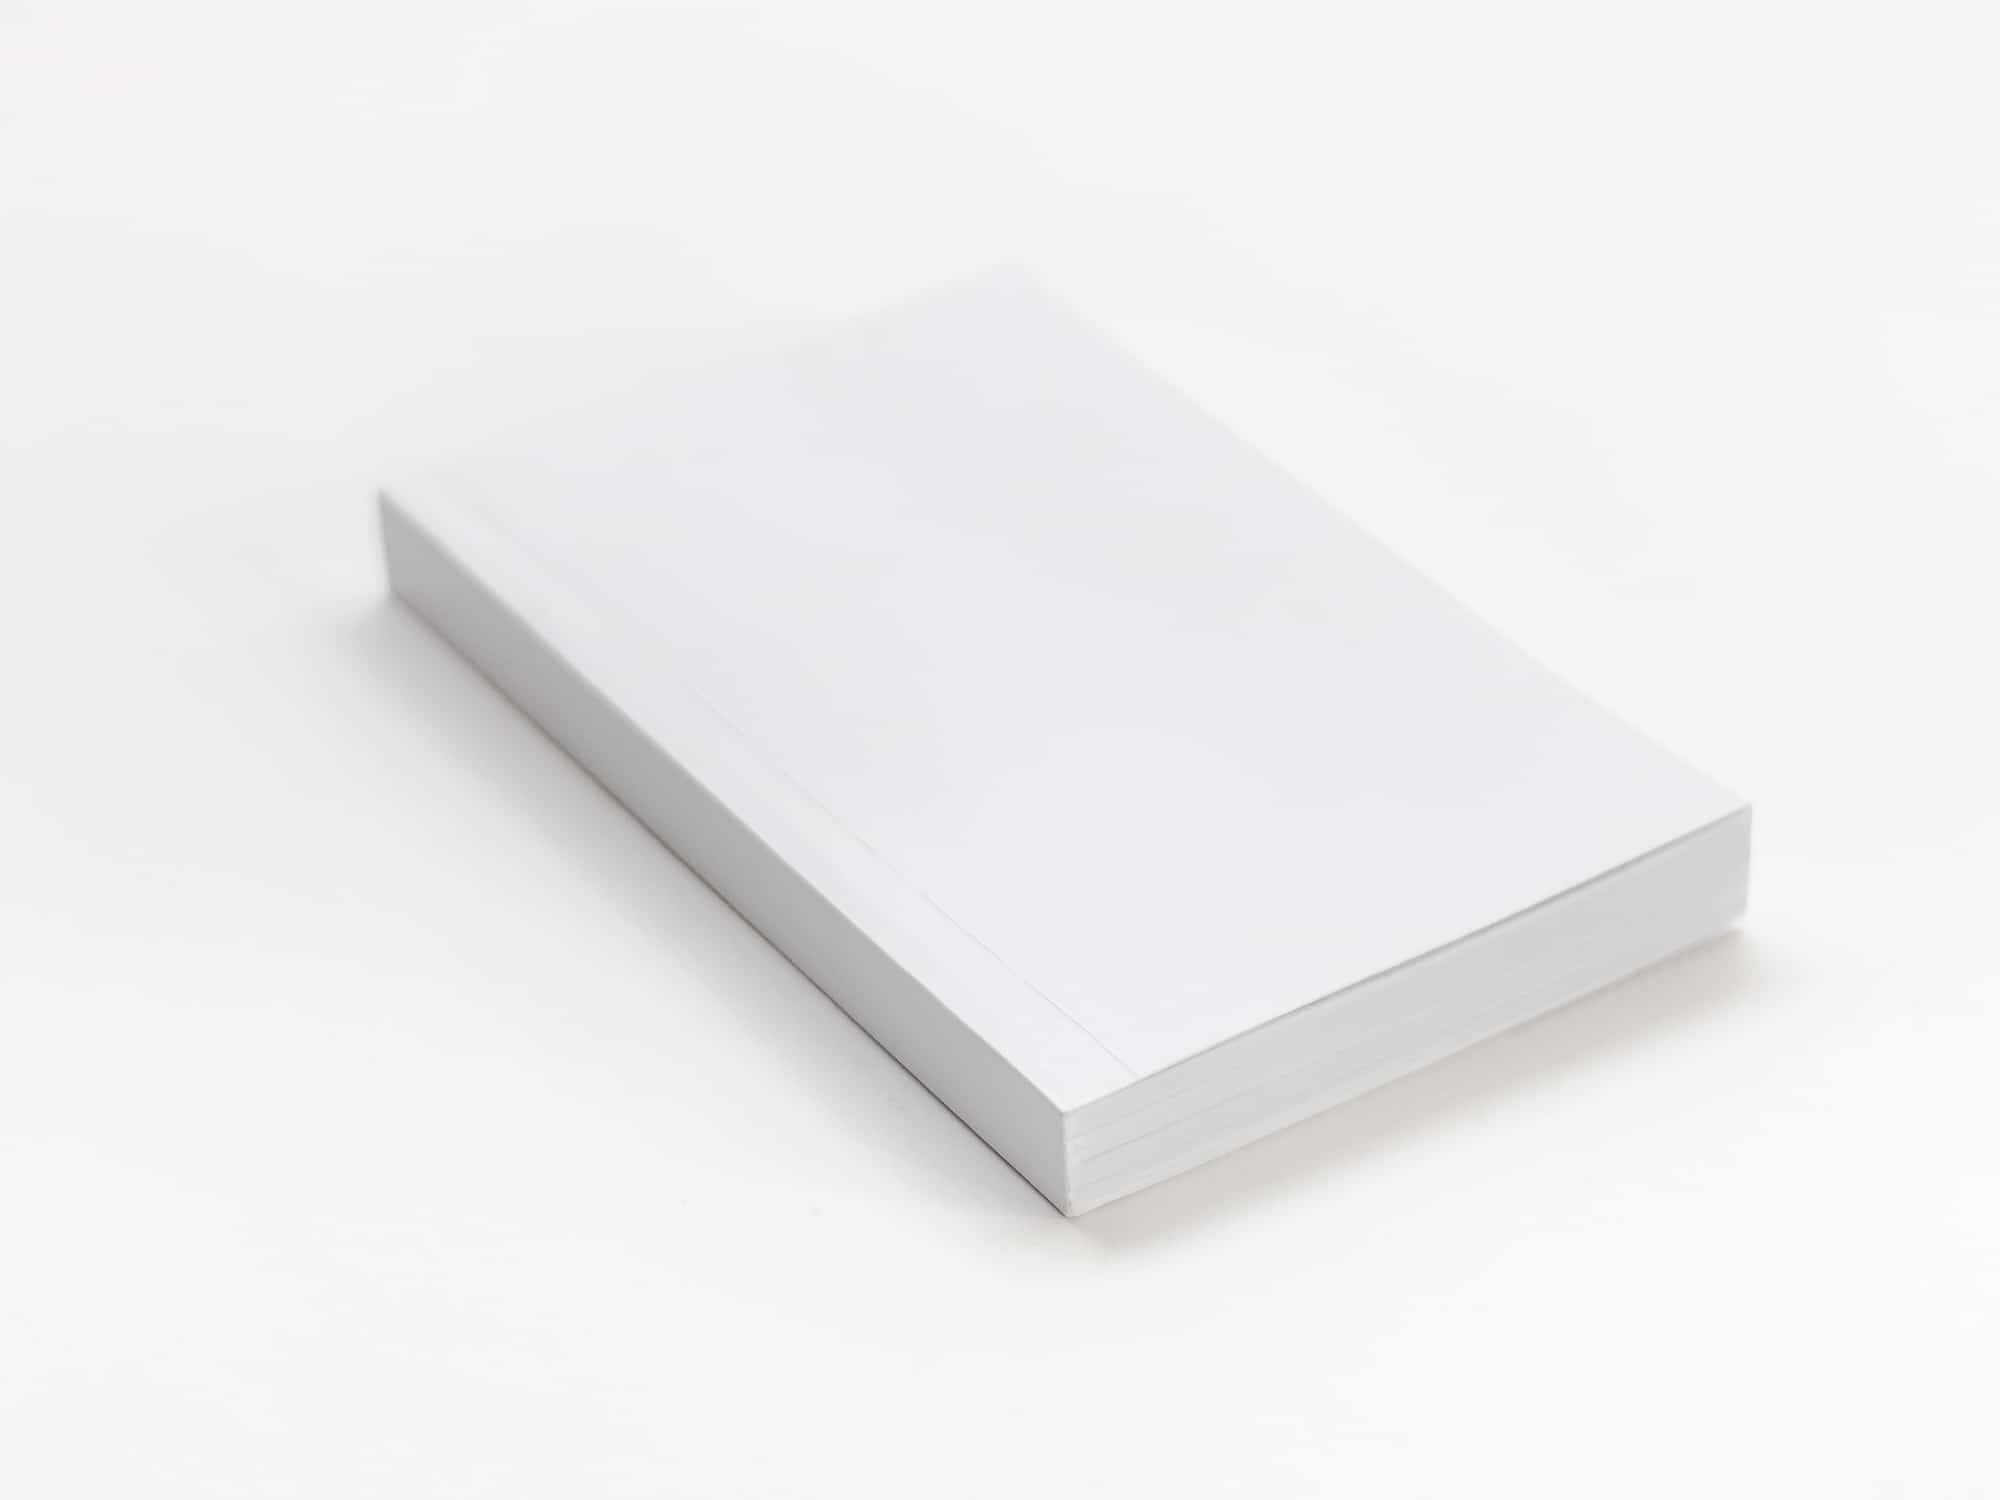 Softcover Book Mockup | The Mockup Club